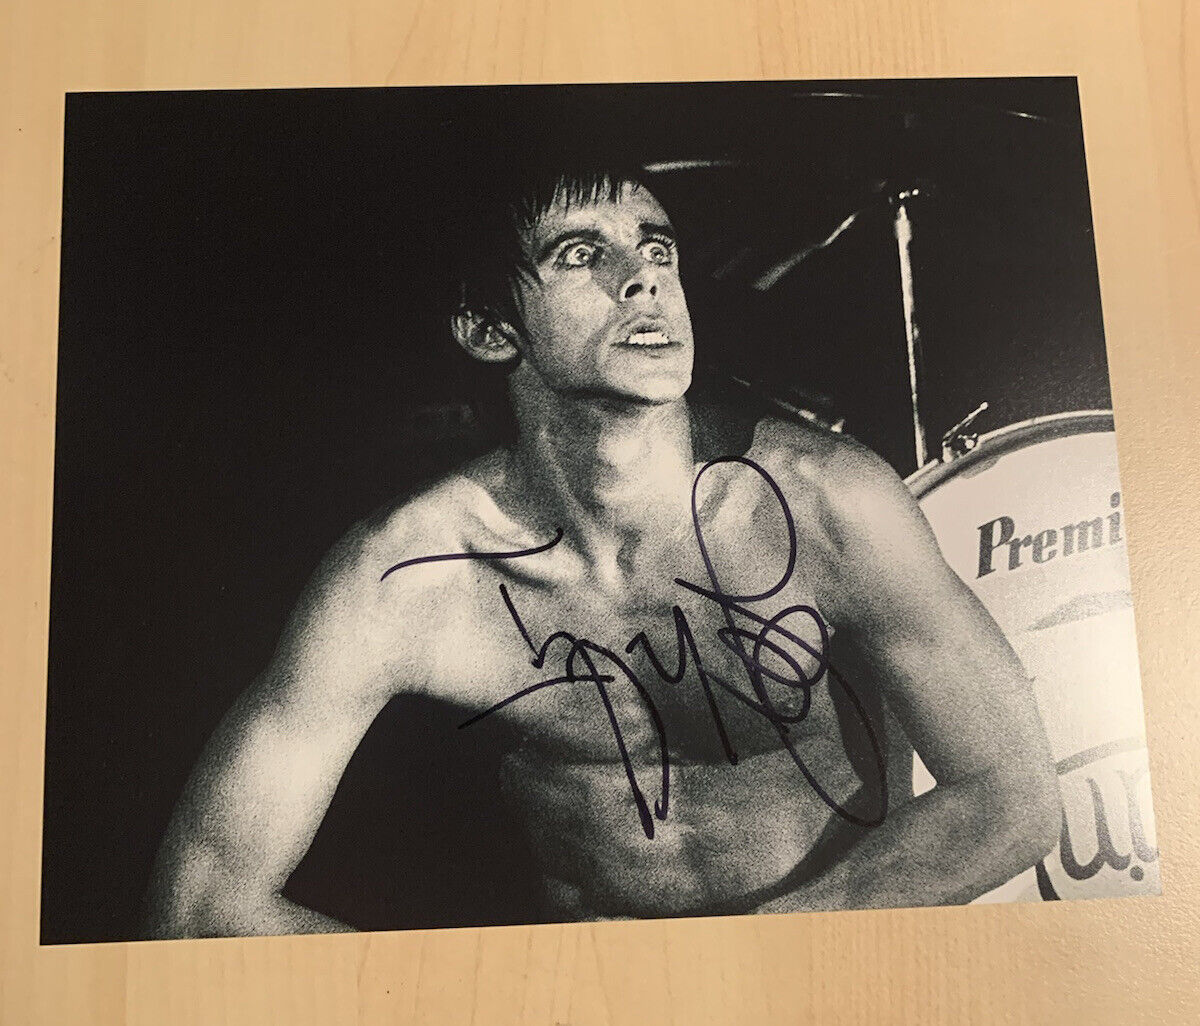 IGGY POP HAND SIGNED 8x10 Photo Poster painting AUTOGRAPHED VERY RARE LEGENDARY SINGER COA